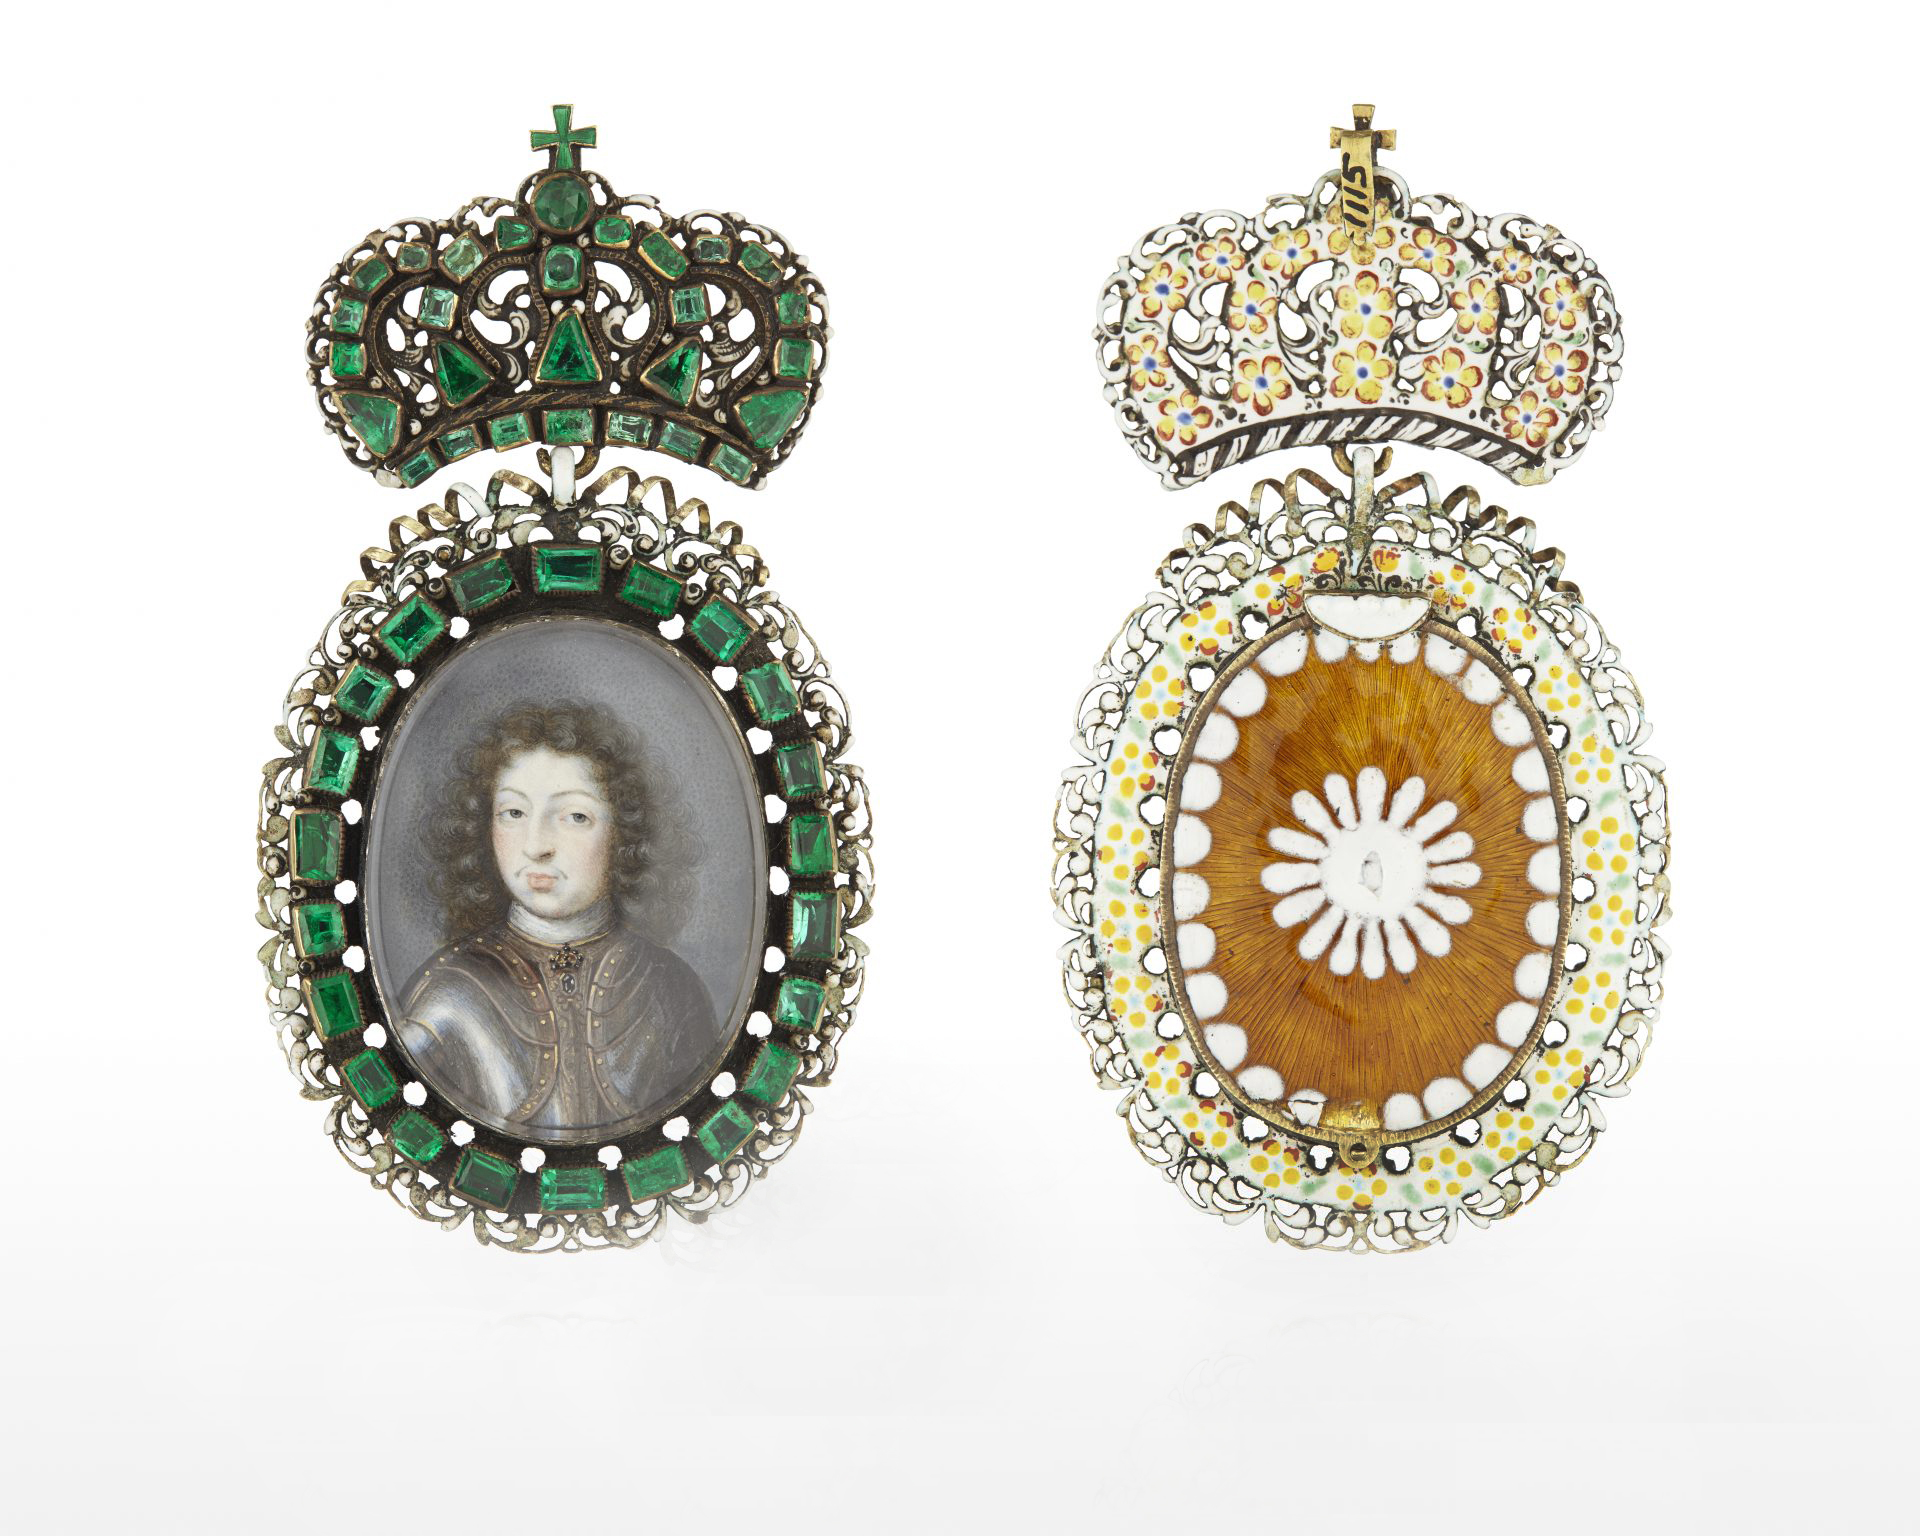 A jewelled pendant with a portrait.